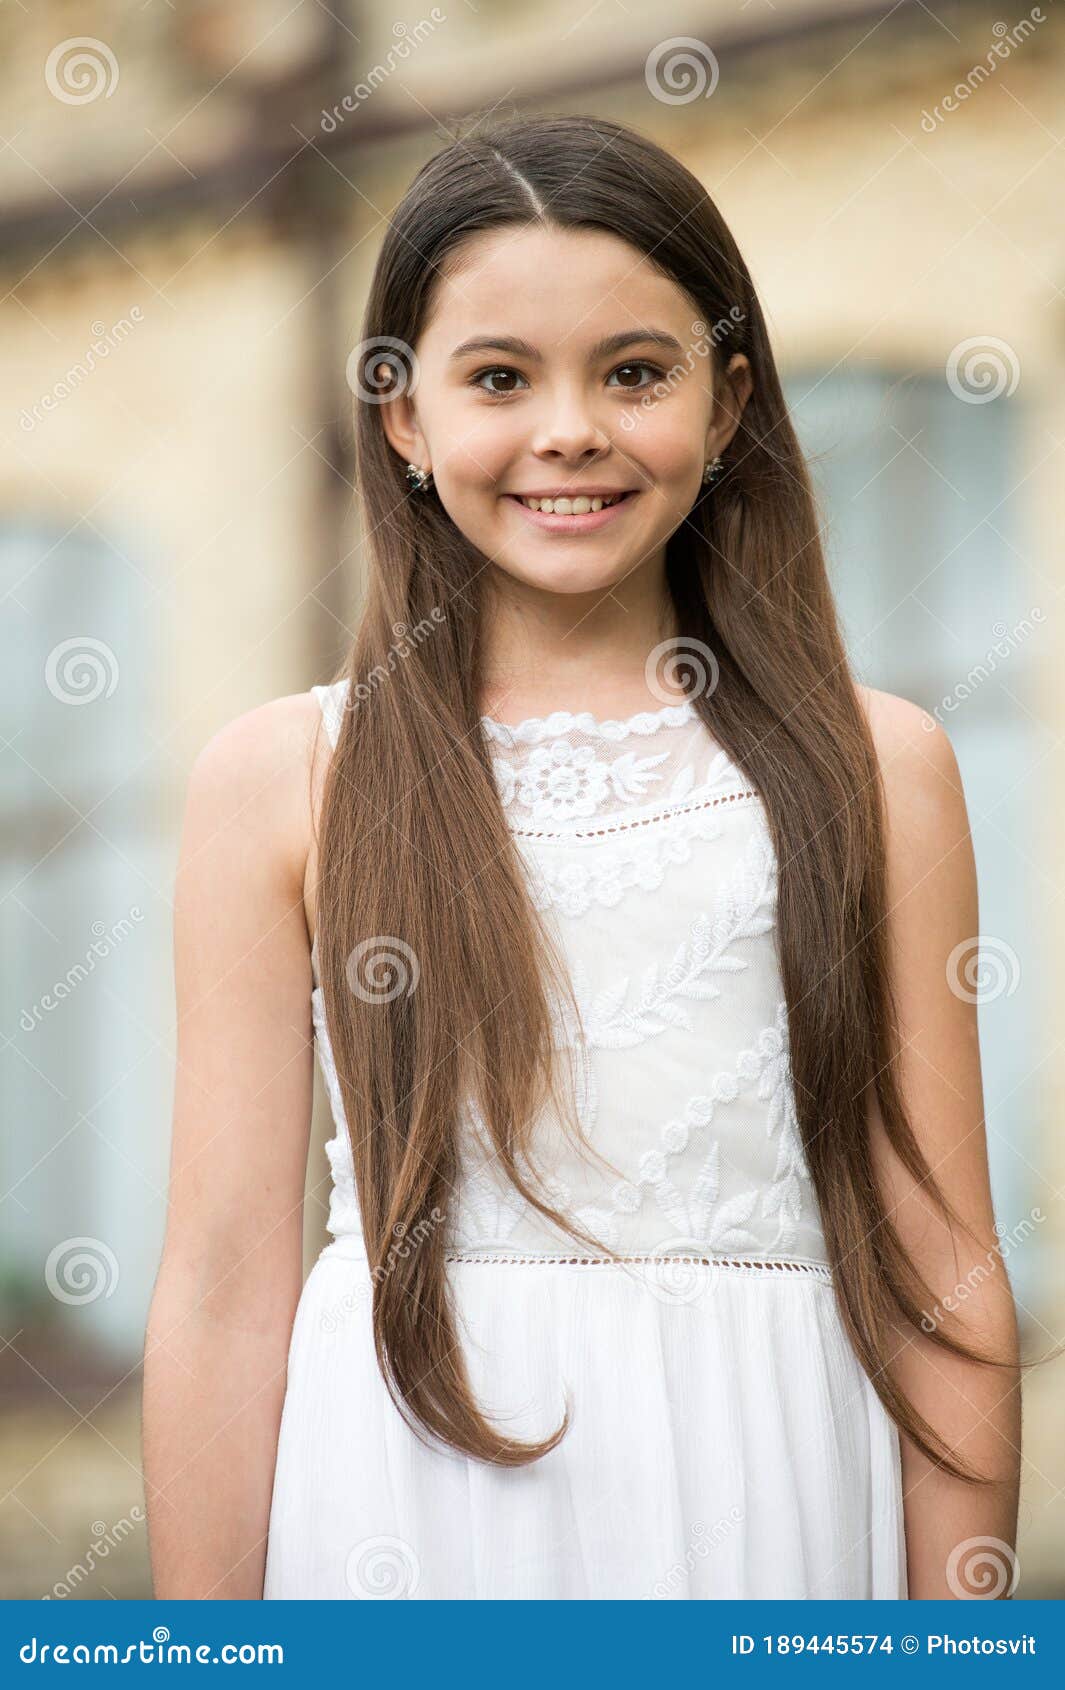 Love the Shine. Beauty Look of Child Girl. Happy Child Smile Outdoors Stock  Photo - Image of fashionable, adorable: 189445574